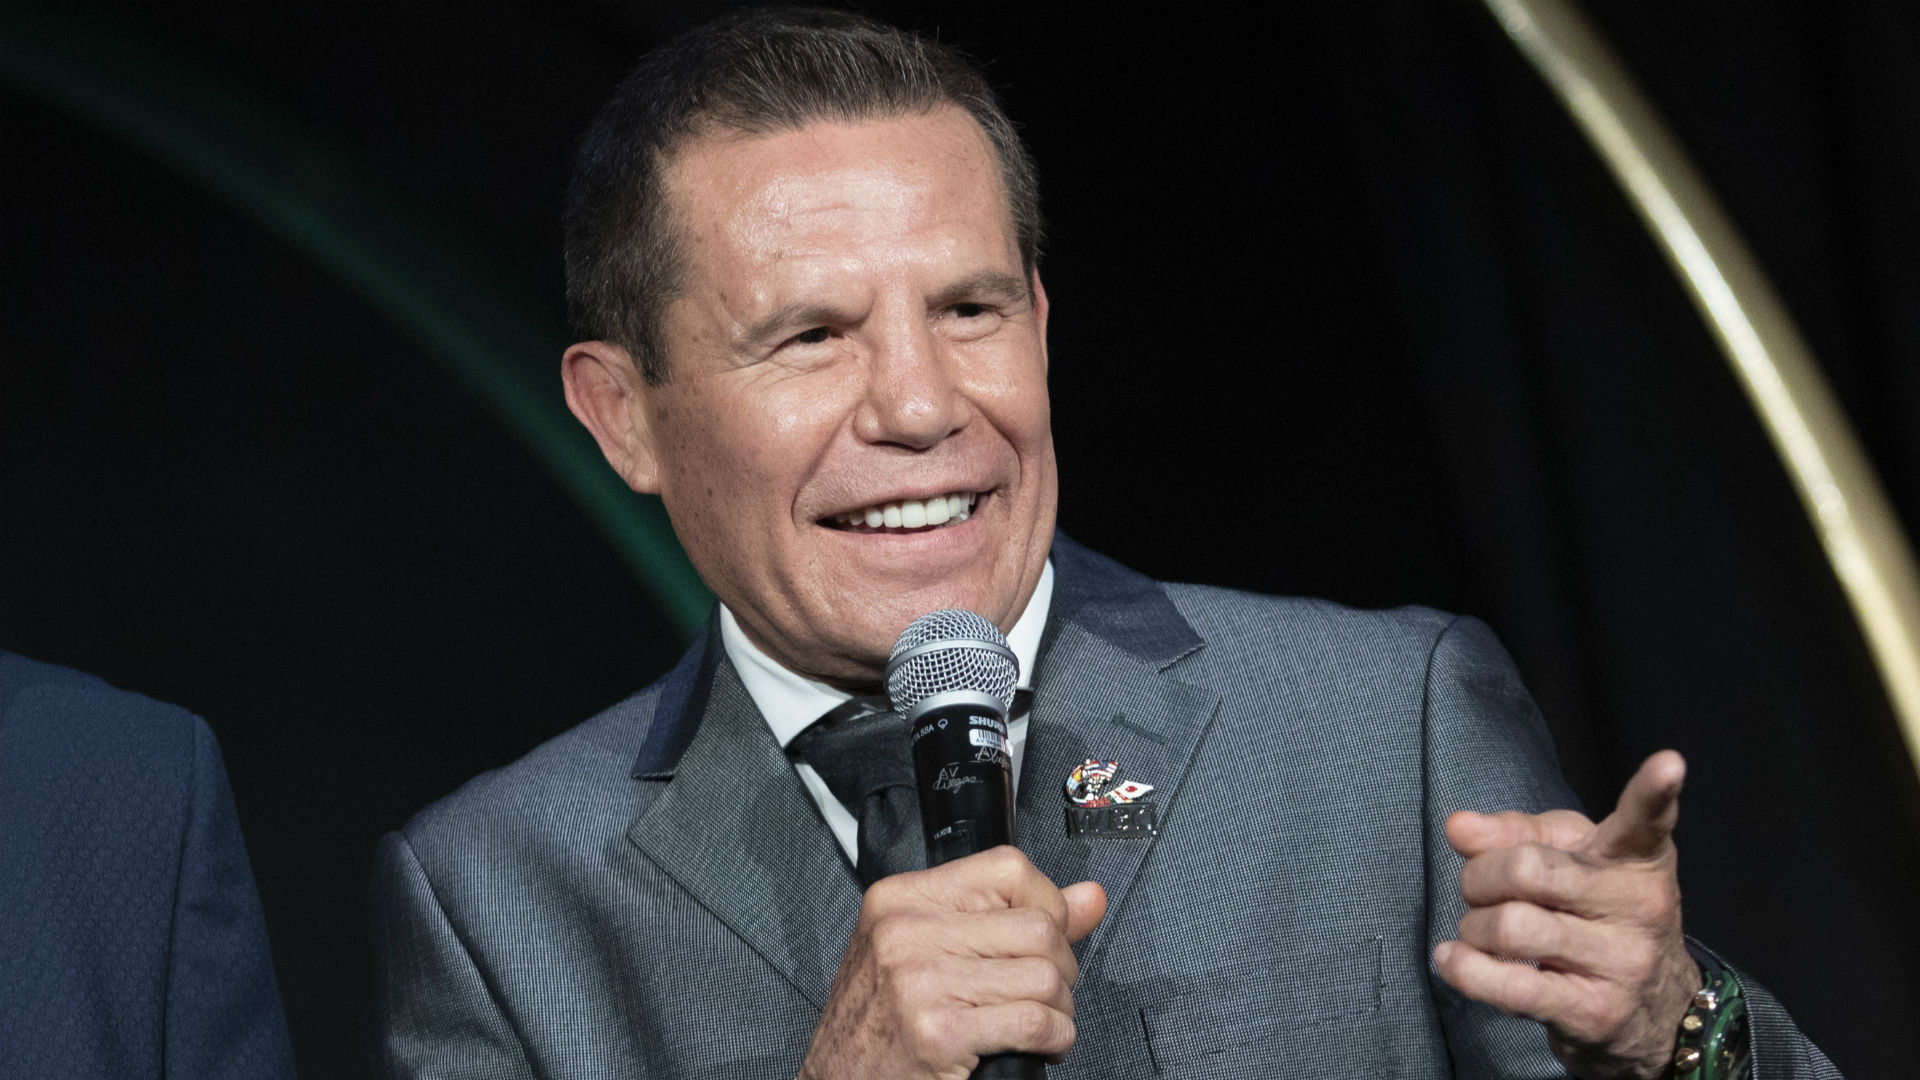 Julio Cesar Chavez Cinco de Mayo fights were special thanks to Mexican